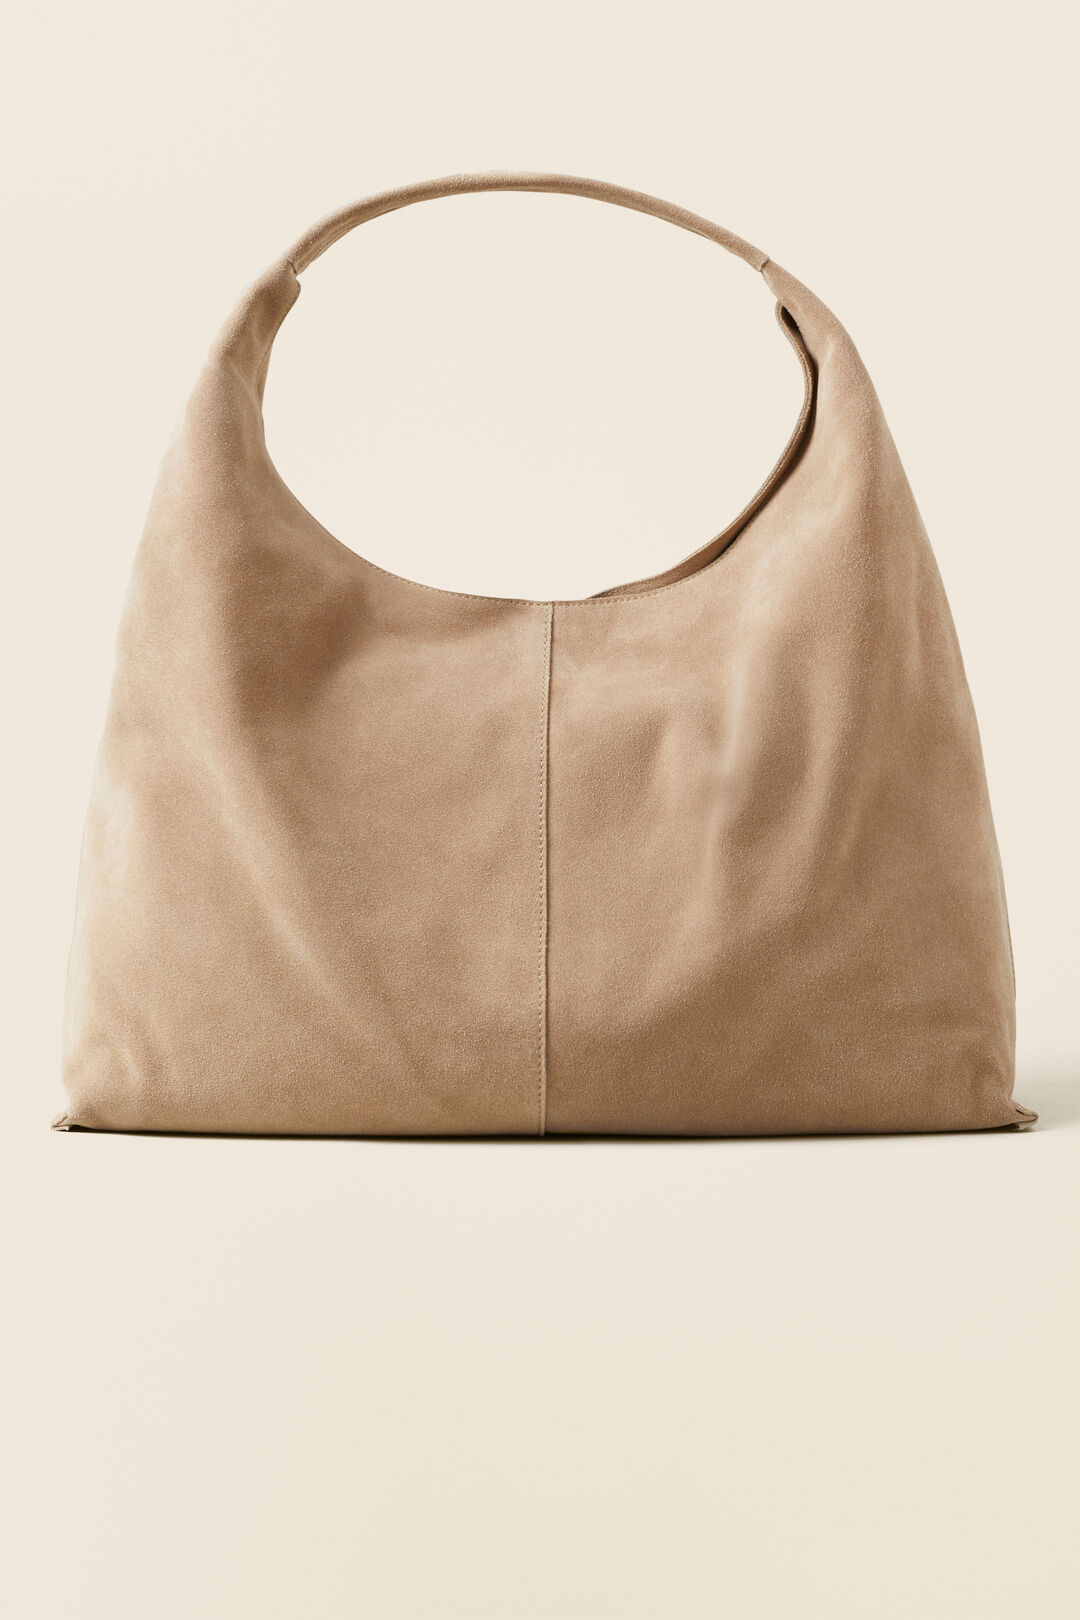 Leather Relaxed Tote  Champagne Beige  hi-res